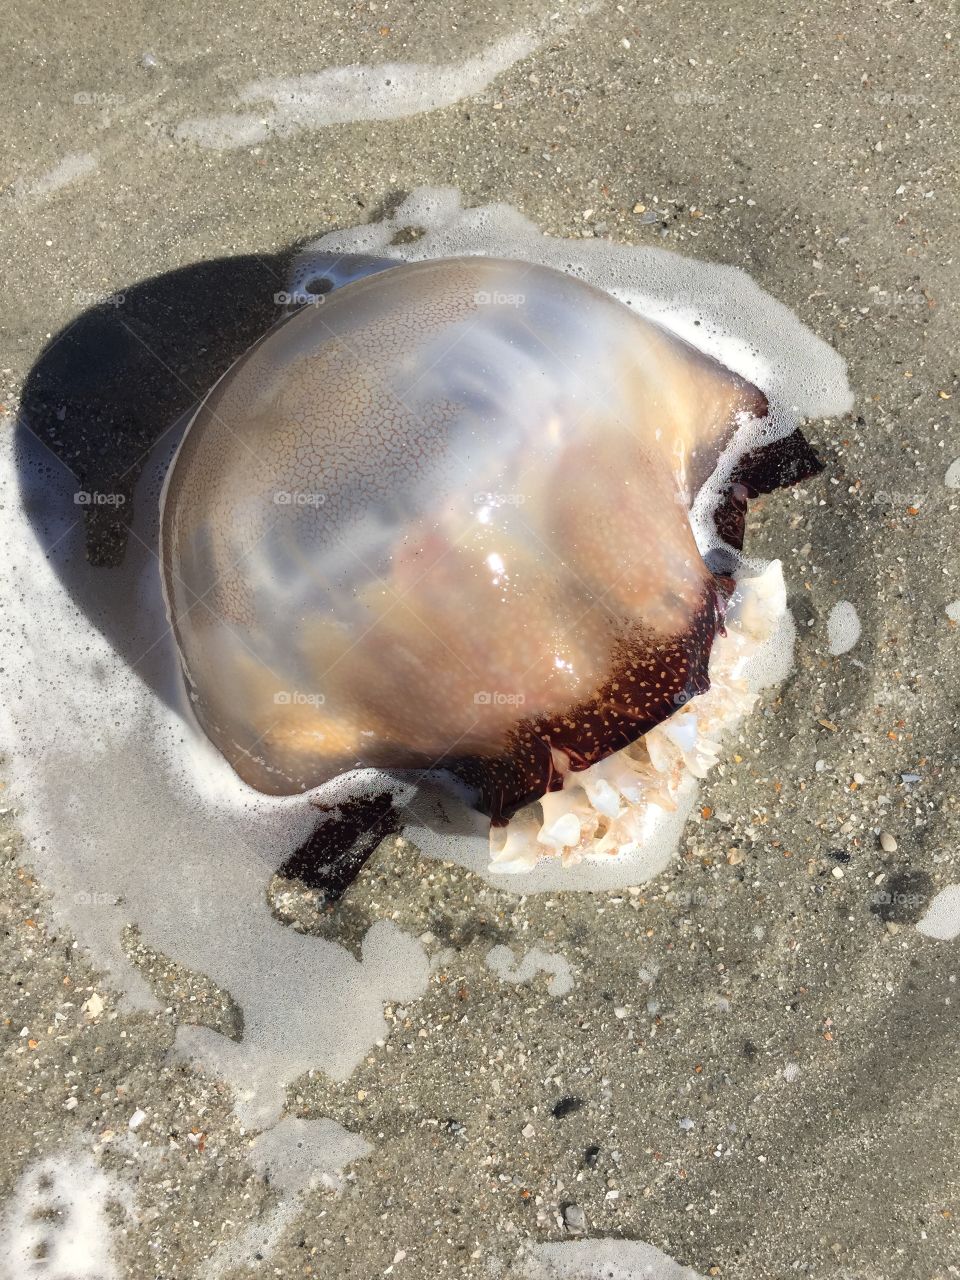 Jellyfish washed up on the beach.